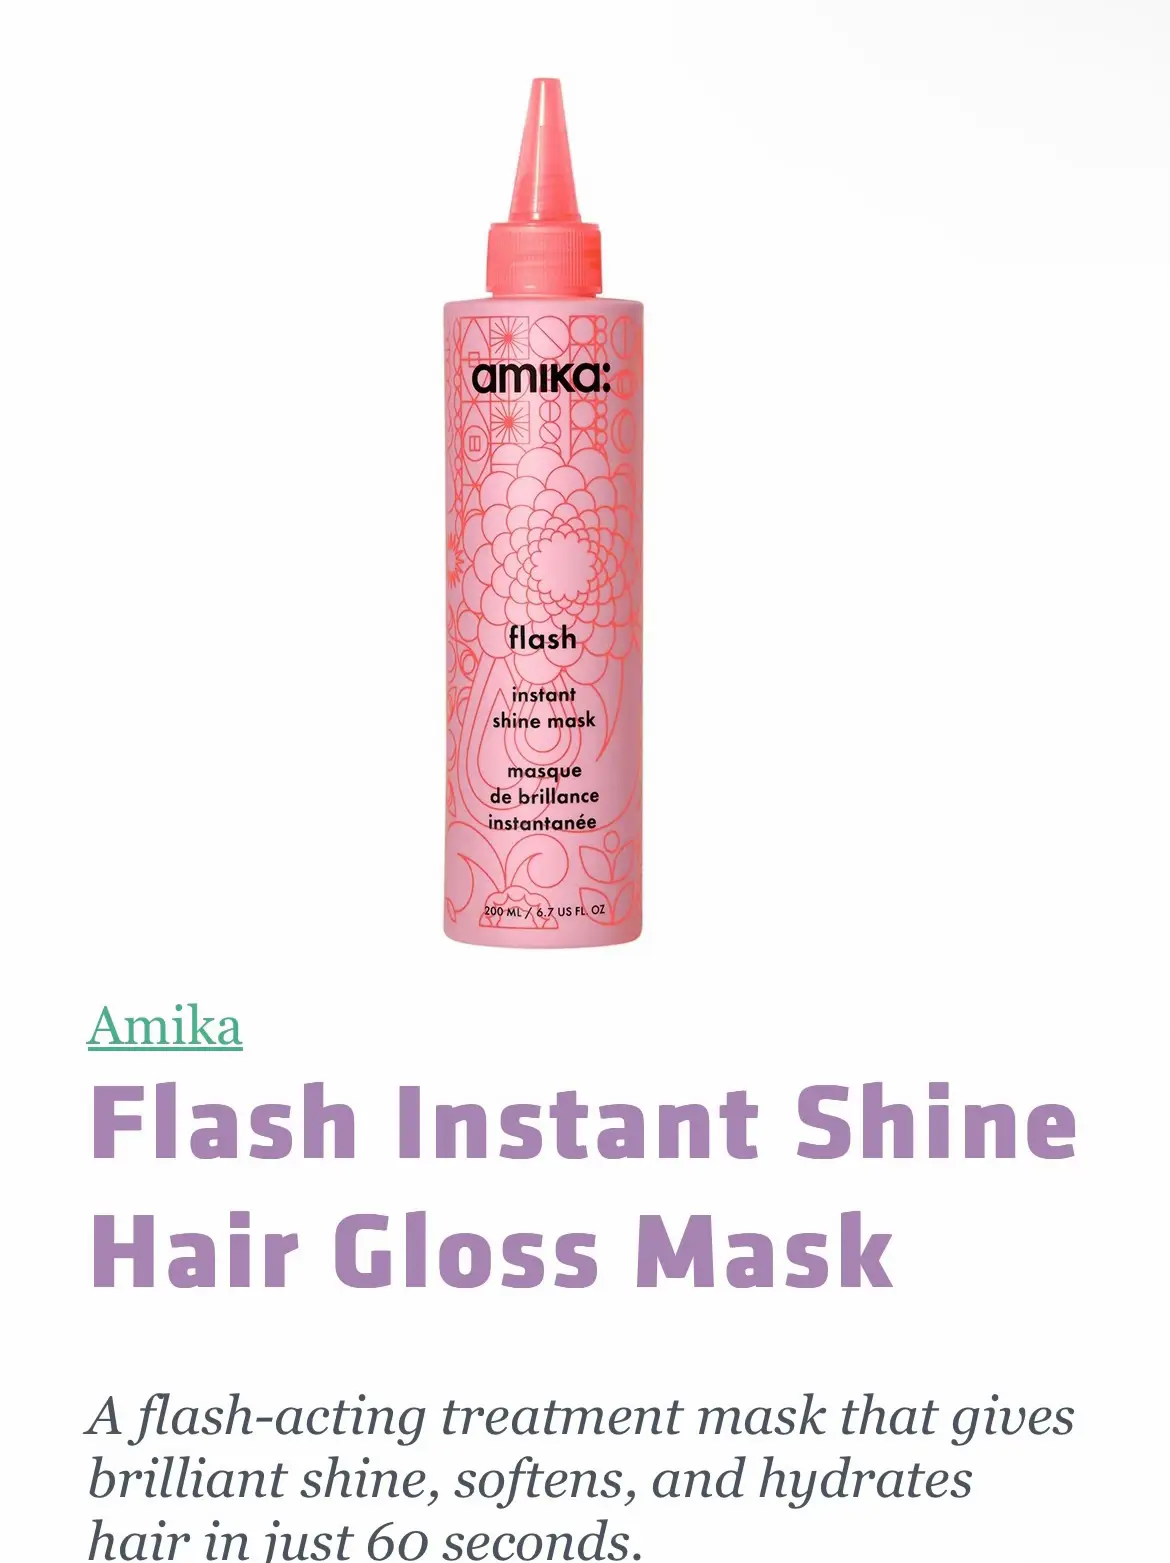 flash instant shine mask: 60 seconds to shiny + soft hair